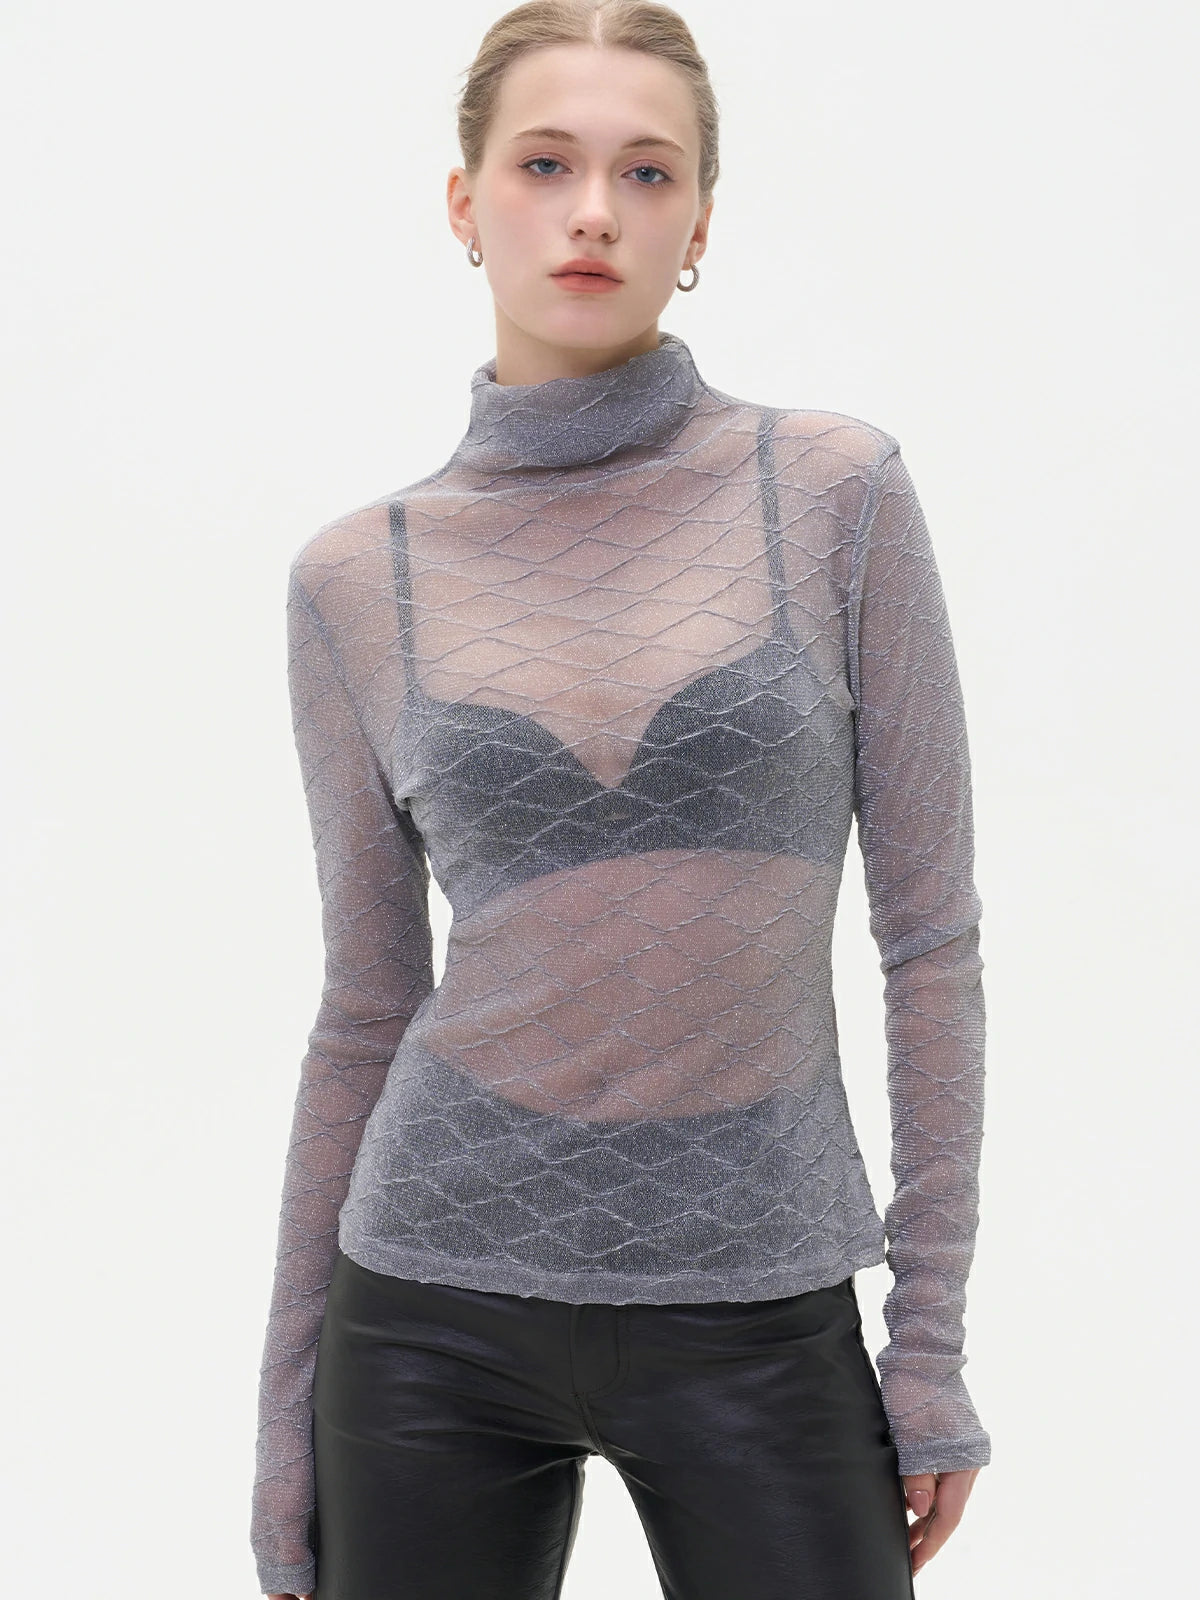 Stylish high-neck sheer base layer with delicate diamond pattern.